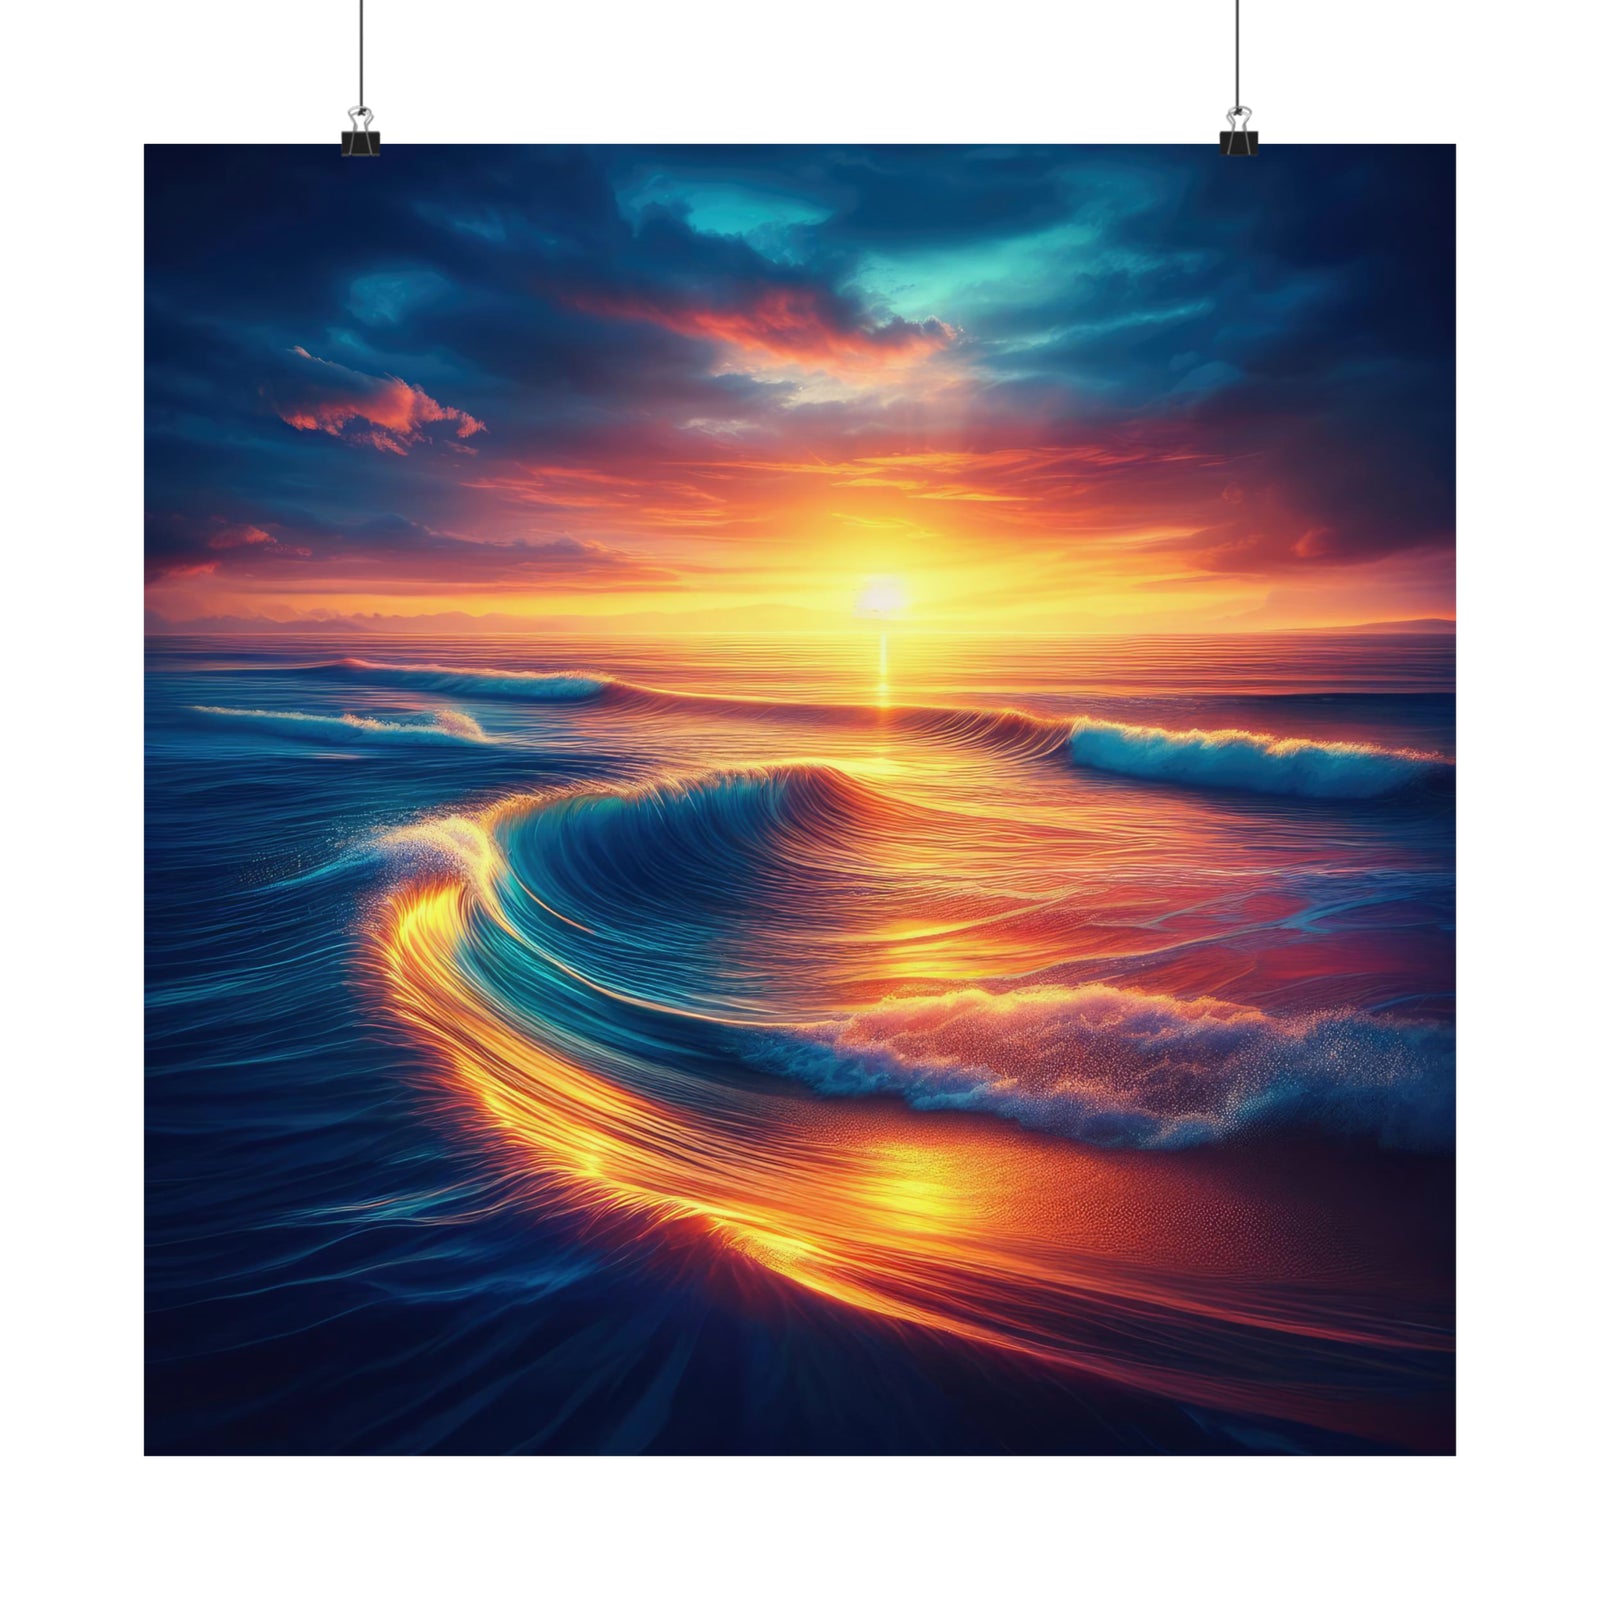 The Art of Ocean Sunsets Poster